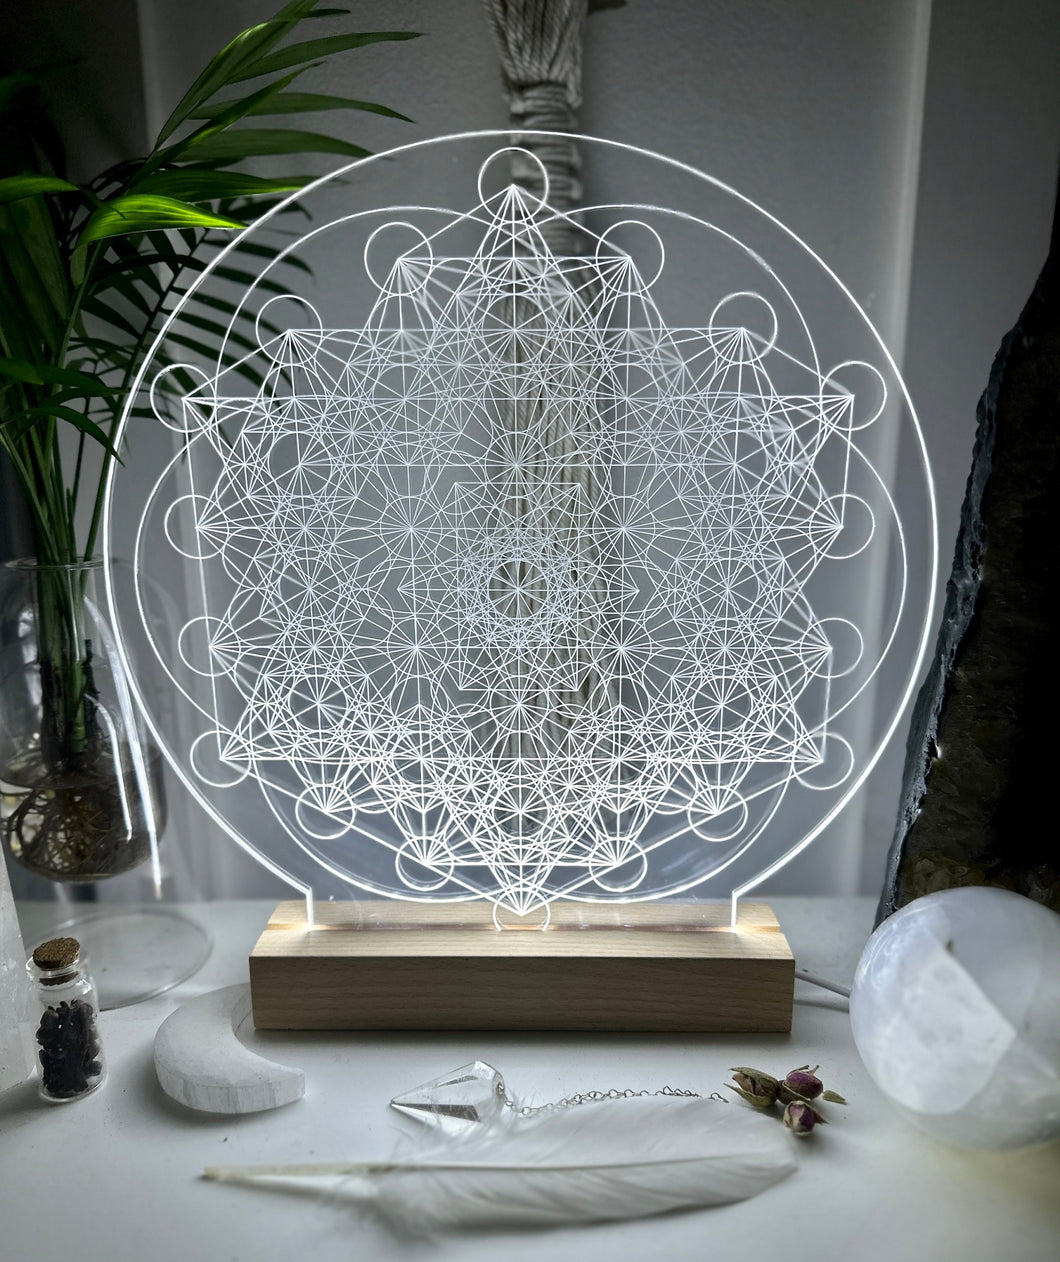 Variation of Metatron’s Cube + Seed of life optional night light - Embrace this high vibrational pattern, a beautiful source of energy